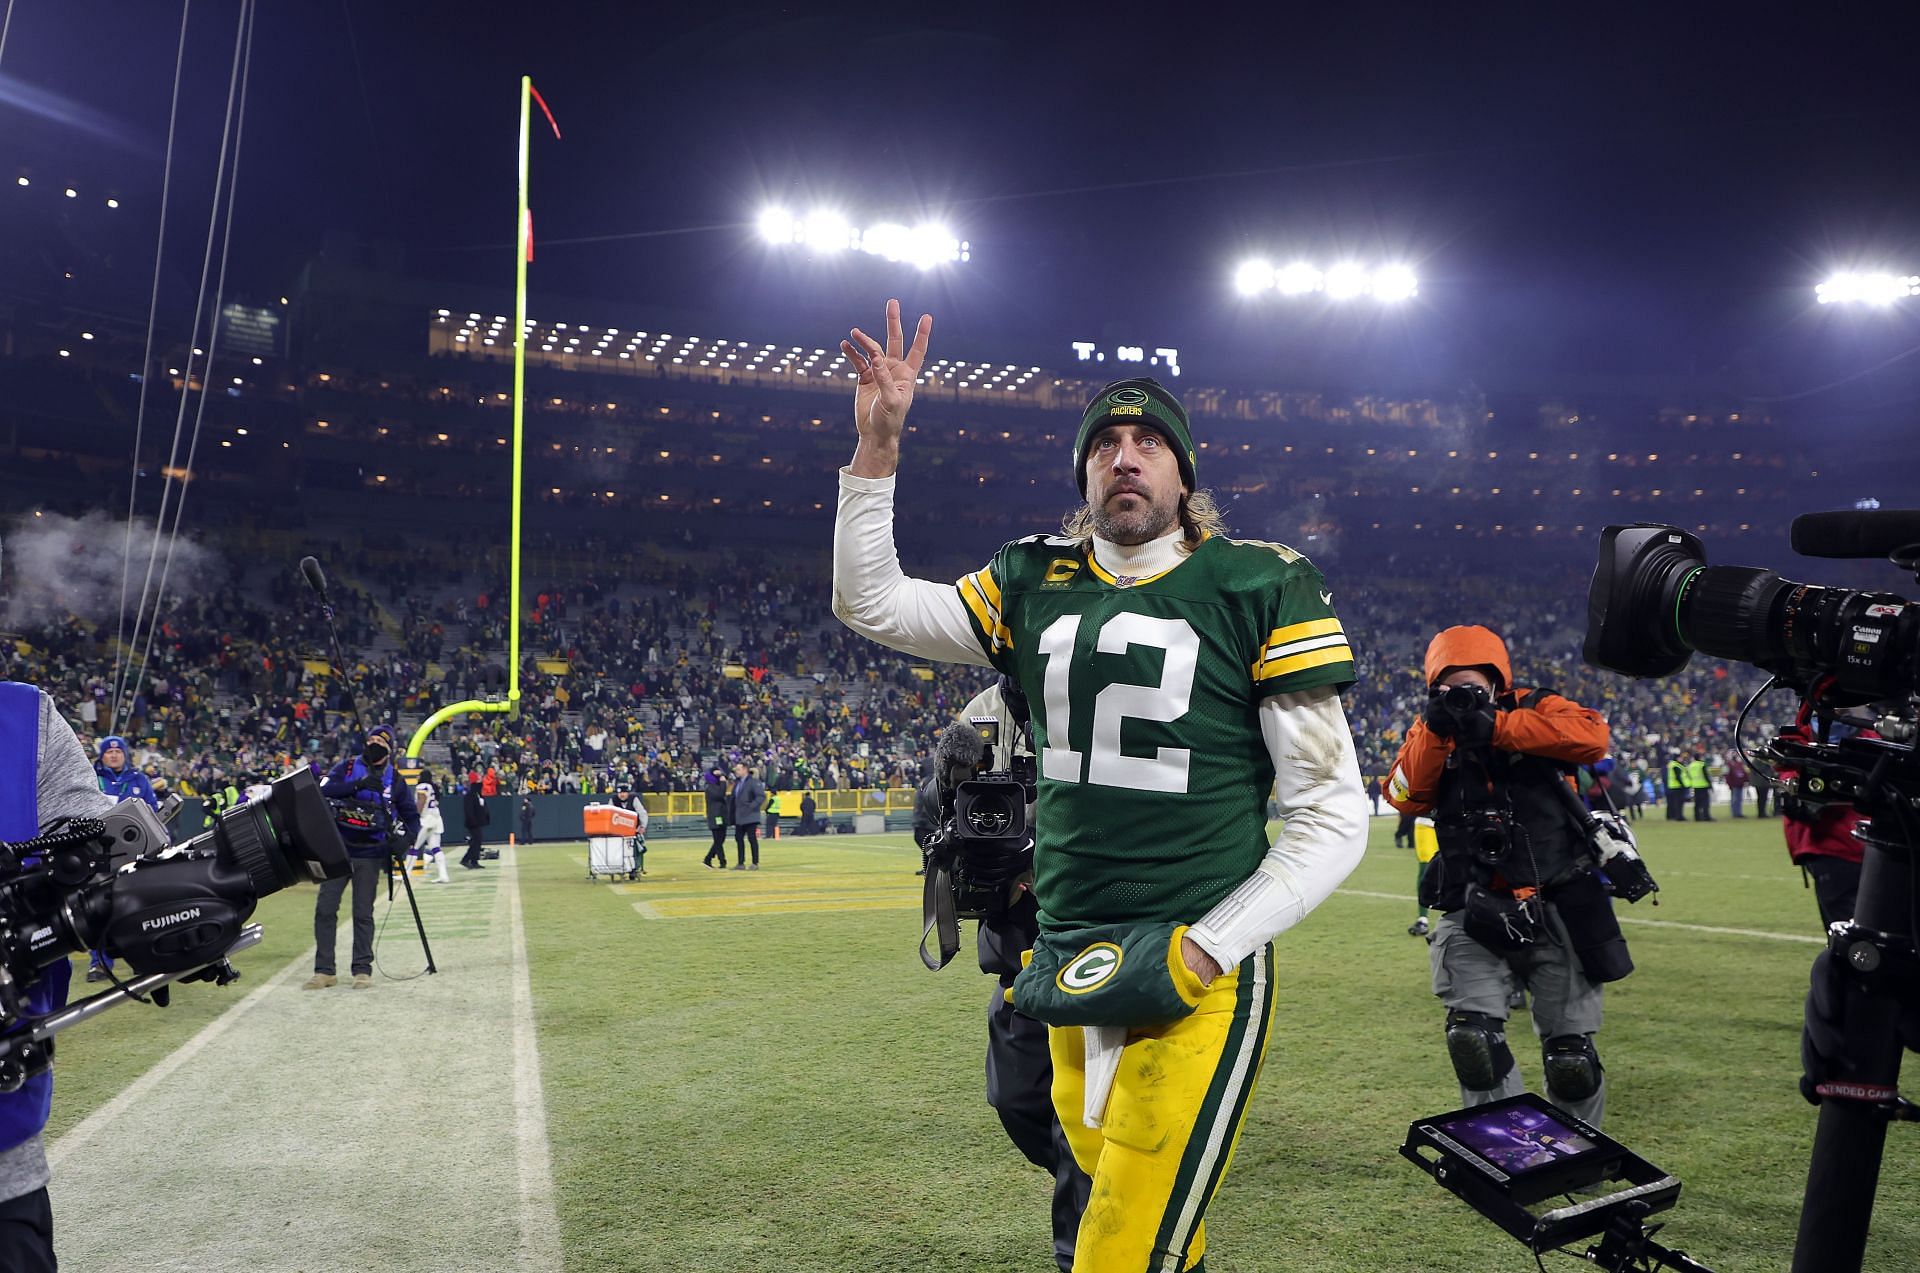 The Green Bay Packers clinched the number one seed